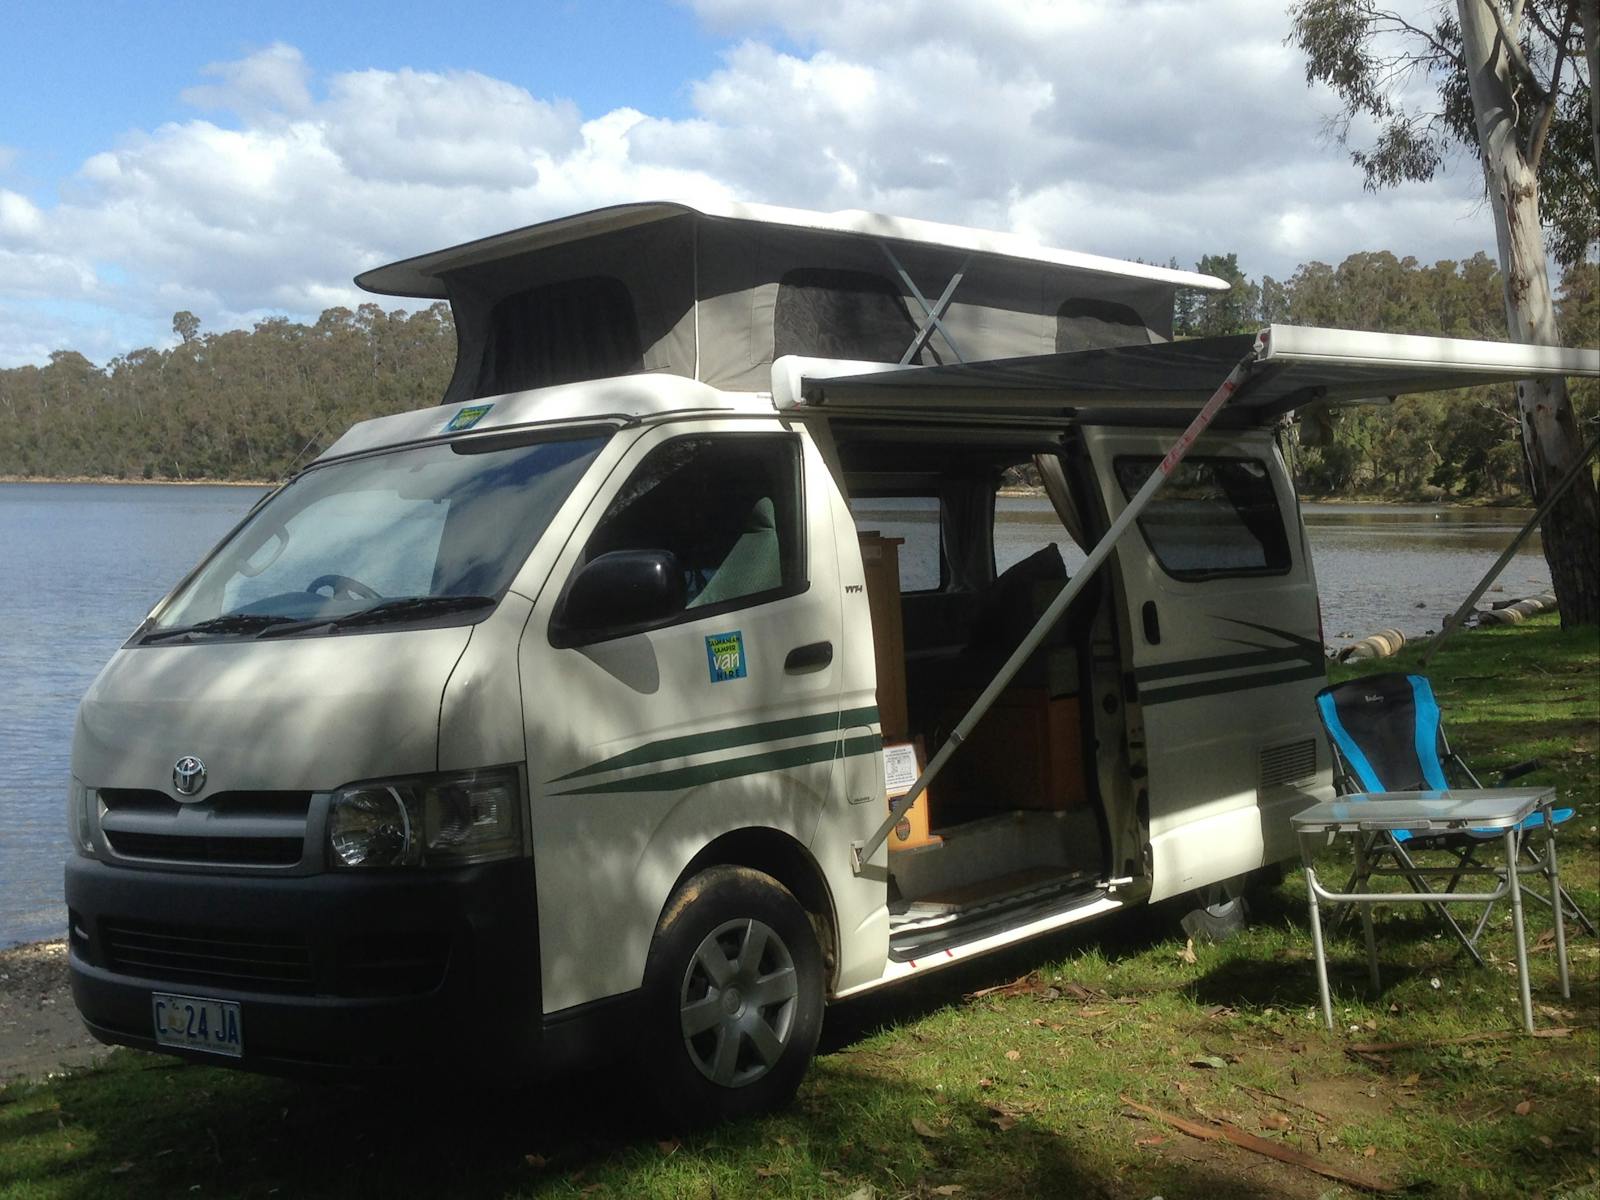 Campervan shown free camping, it's an option in many parts of Tasmania.